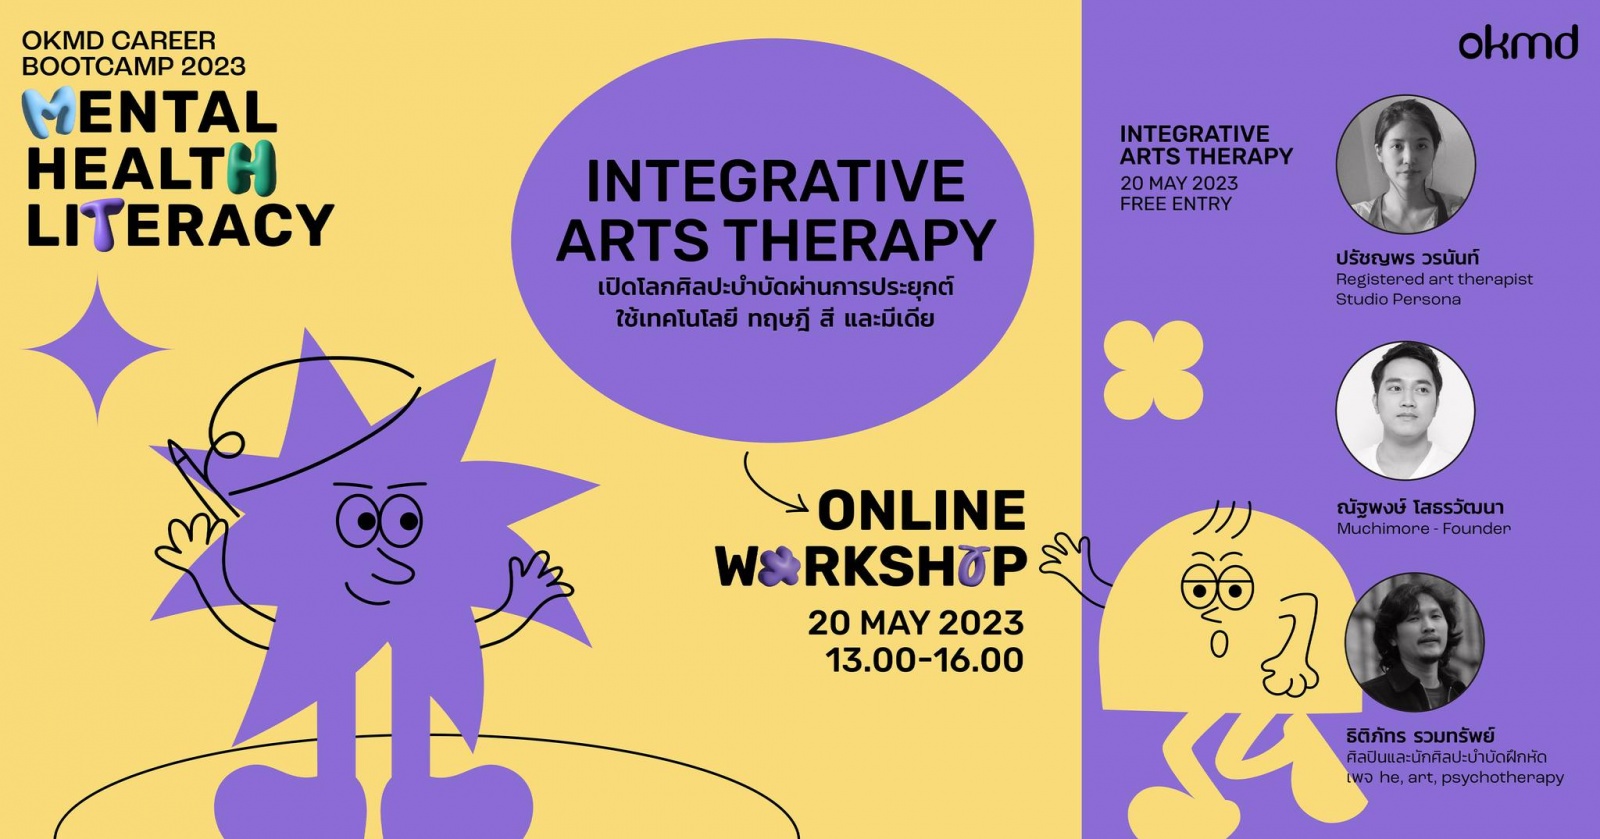 OKMD Career Bootcamp 2023 : Mental Health Literacy Online Workshop 03: Integrative Arts Therapy